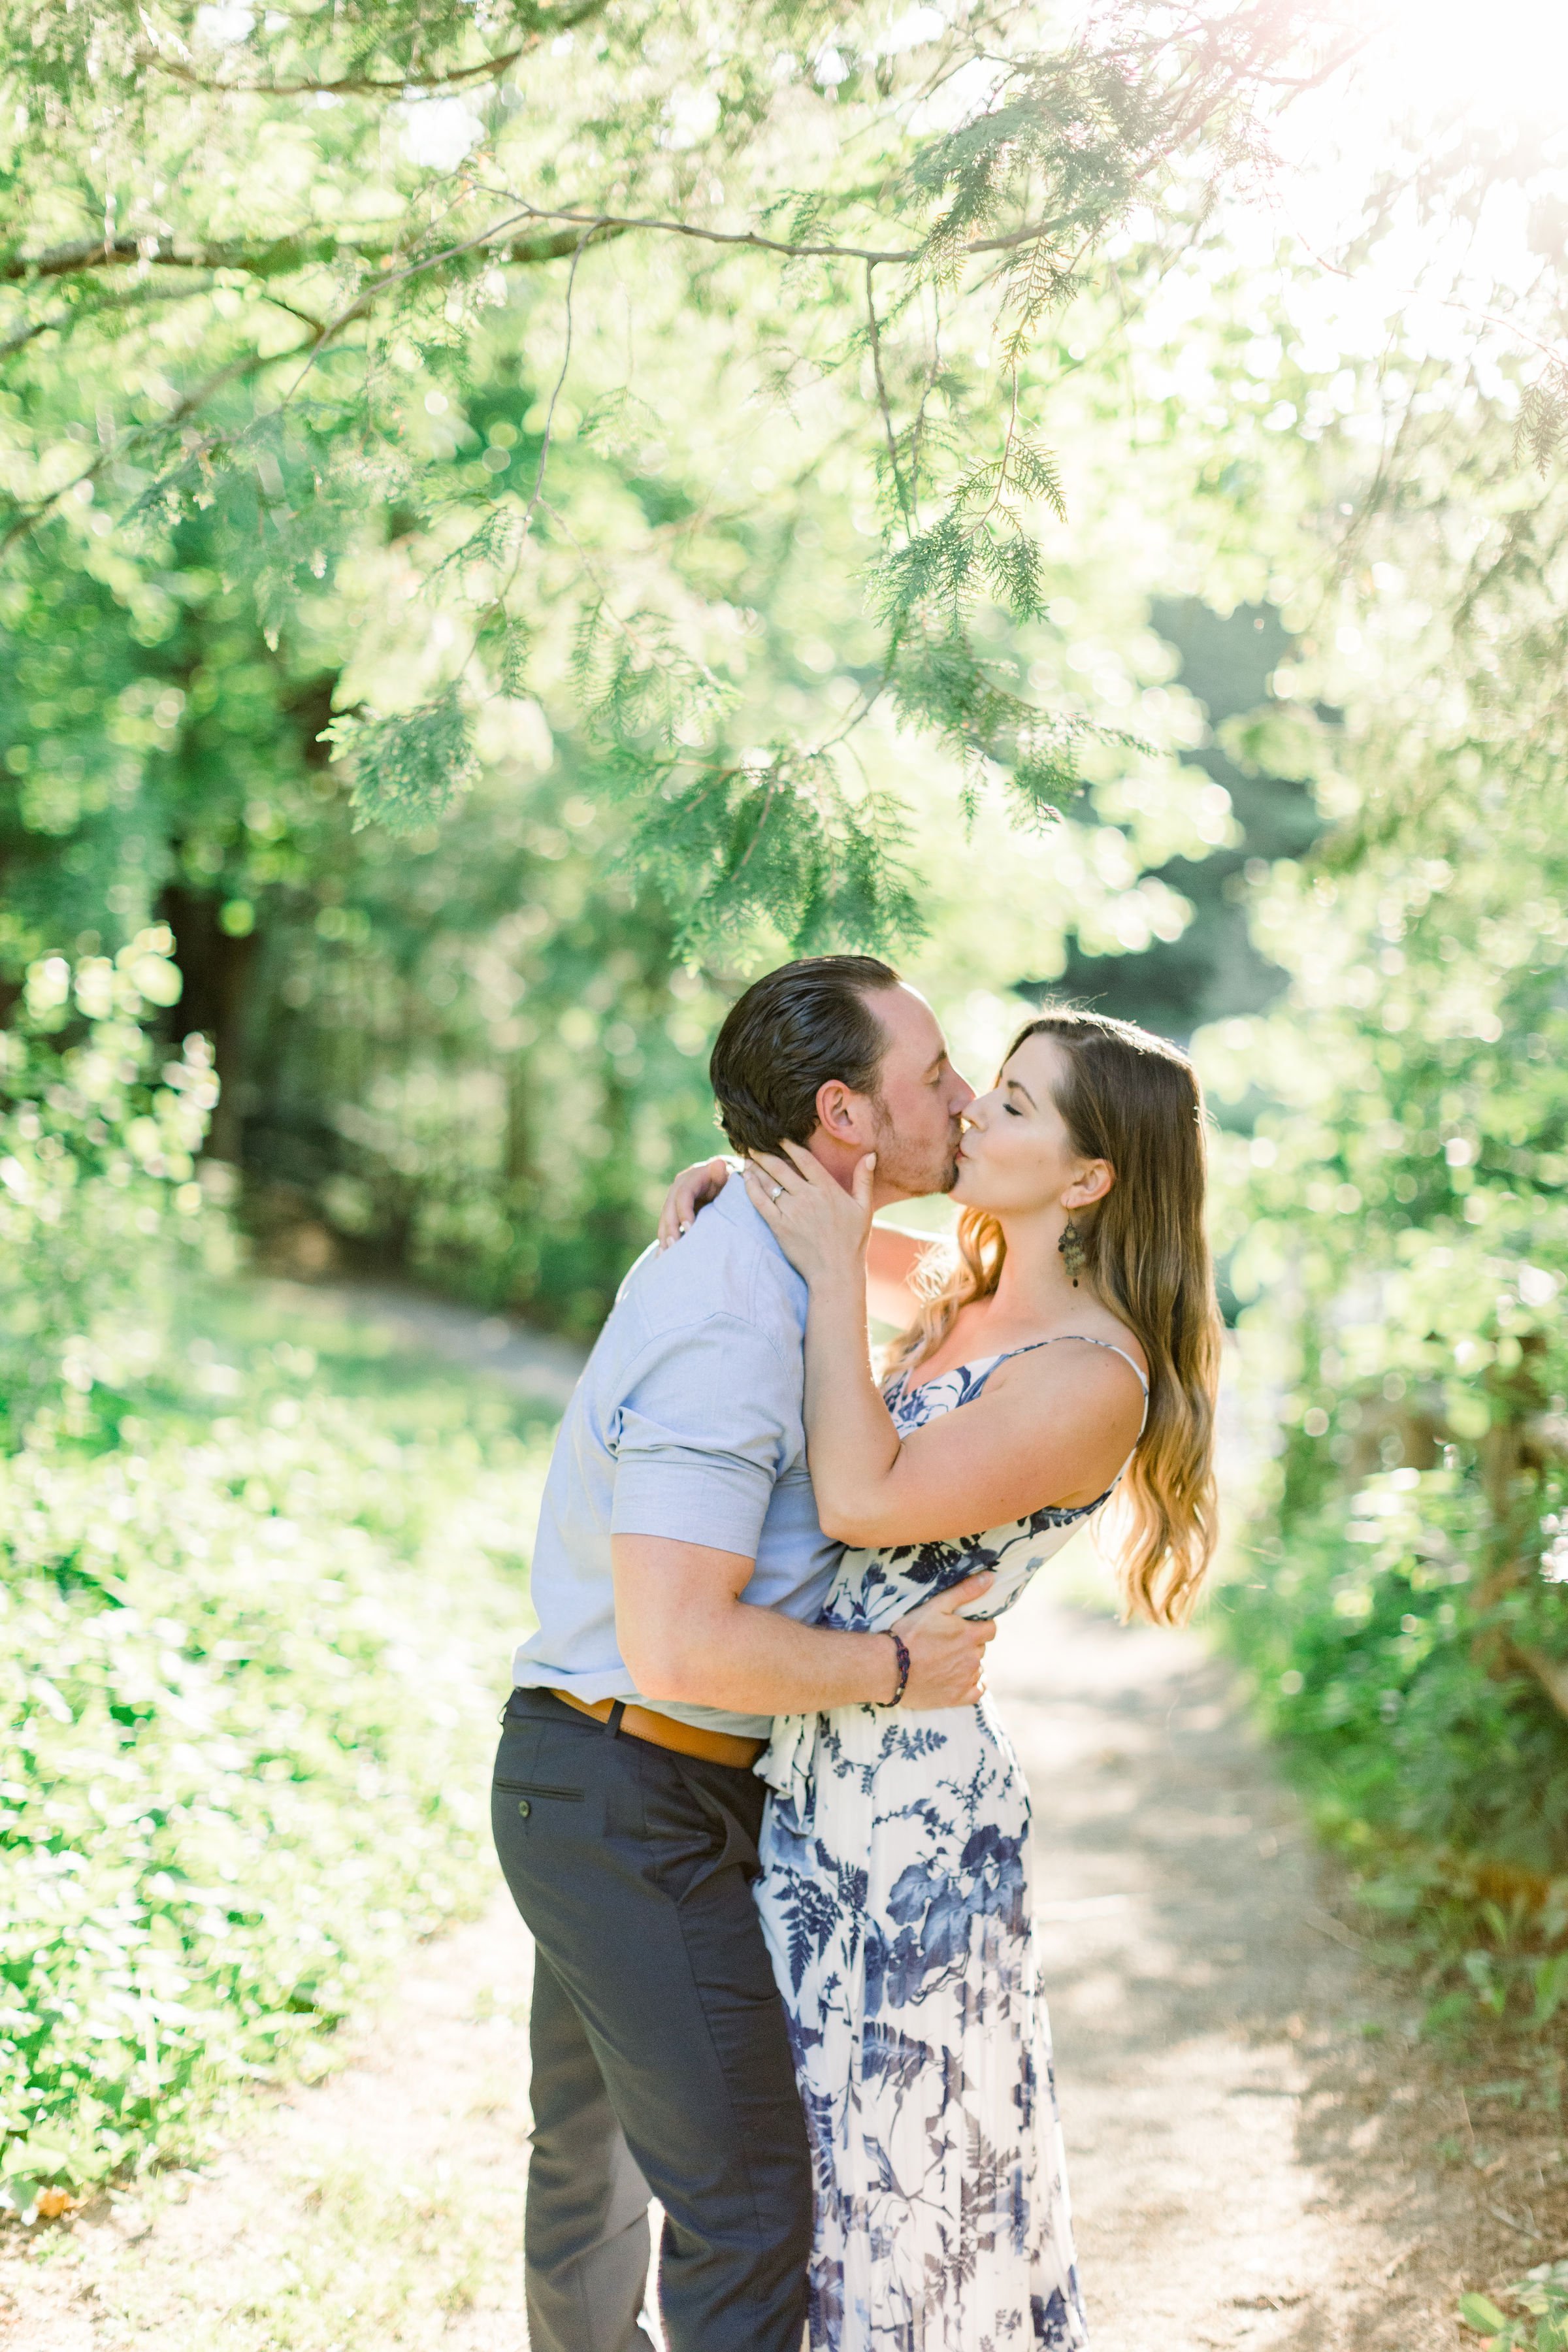  Chelsea Mason Photography captures fiances kissing with beautiful sunlight surrounding them. engagements in the woods kissing pic #chelseamasonphotography #chelseamasonengagements #OttawaEngagements #Almonteengagementphotographer #outdoorengagments 